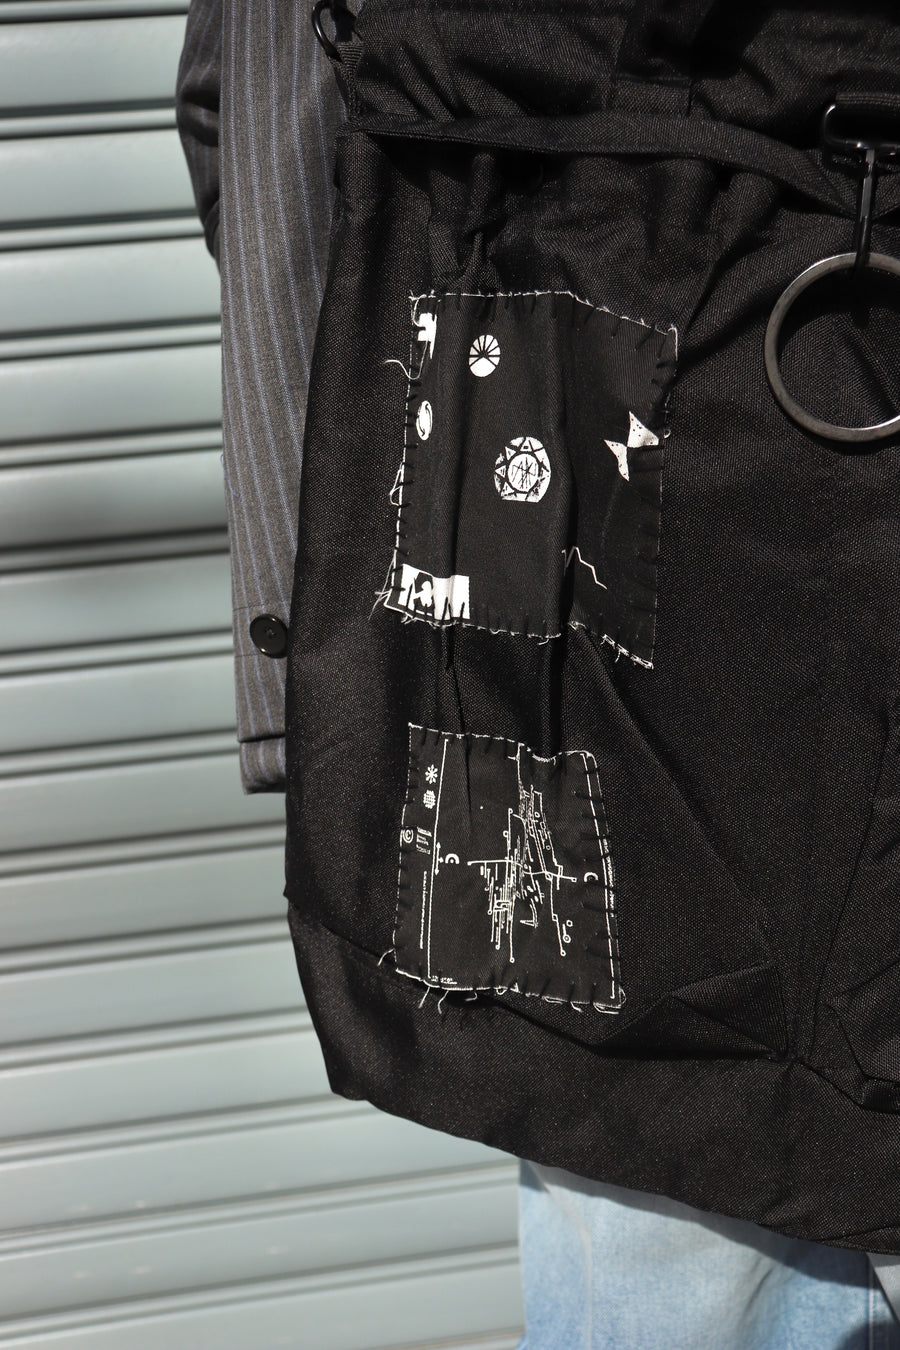 ［ー］Minus  For Flyer’s Helmet Bag With Patched